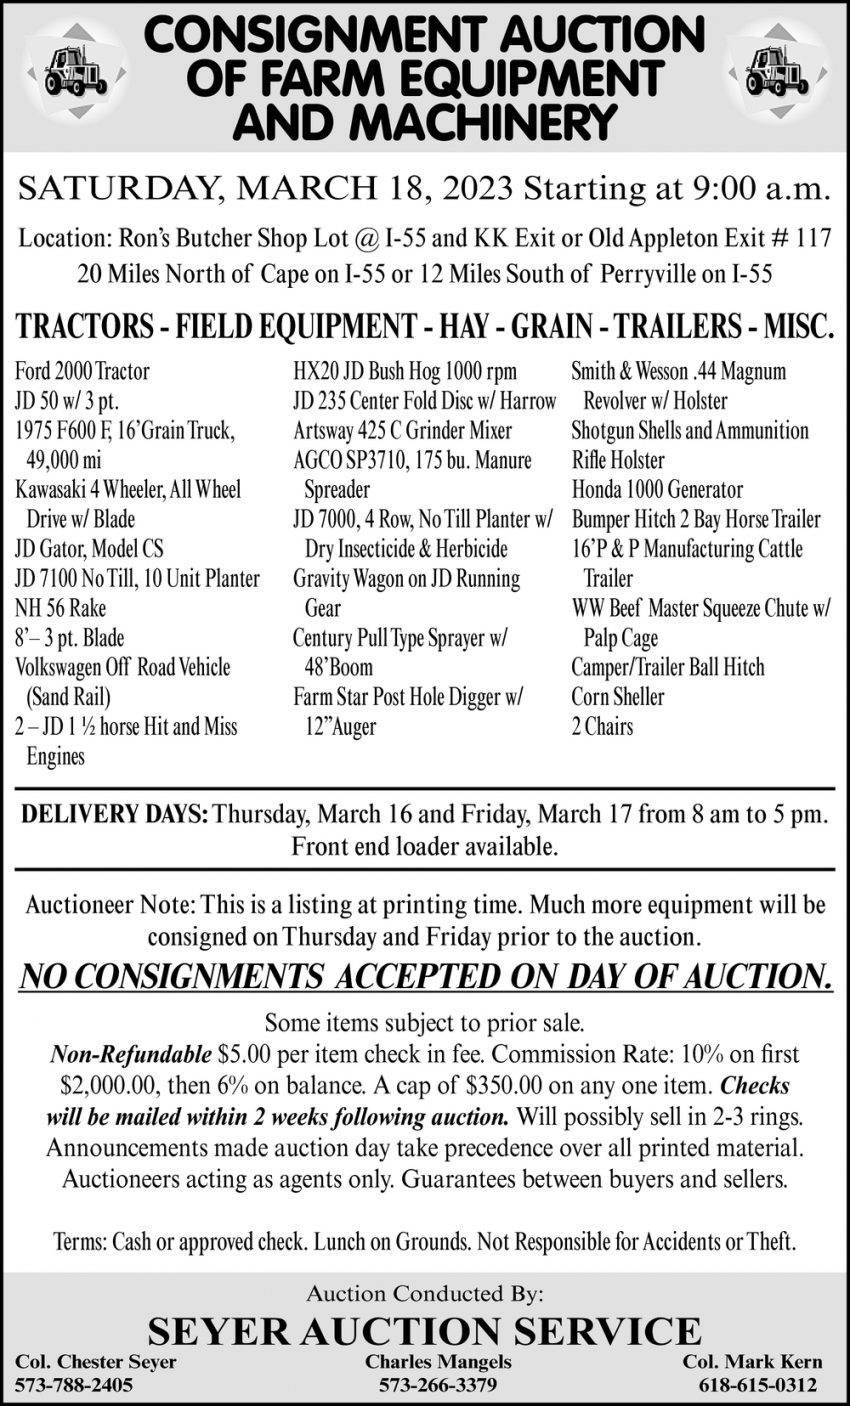 Consignment Auction of Farm Equipment and Machinery